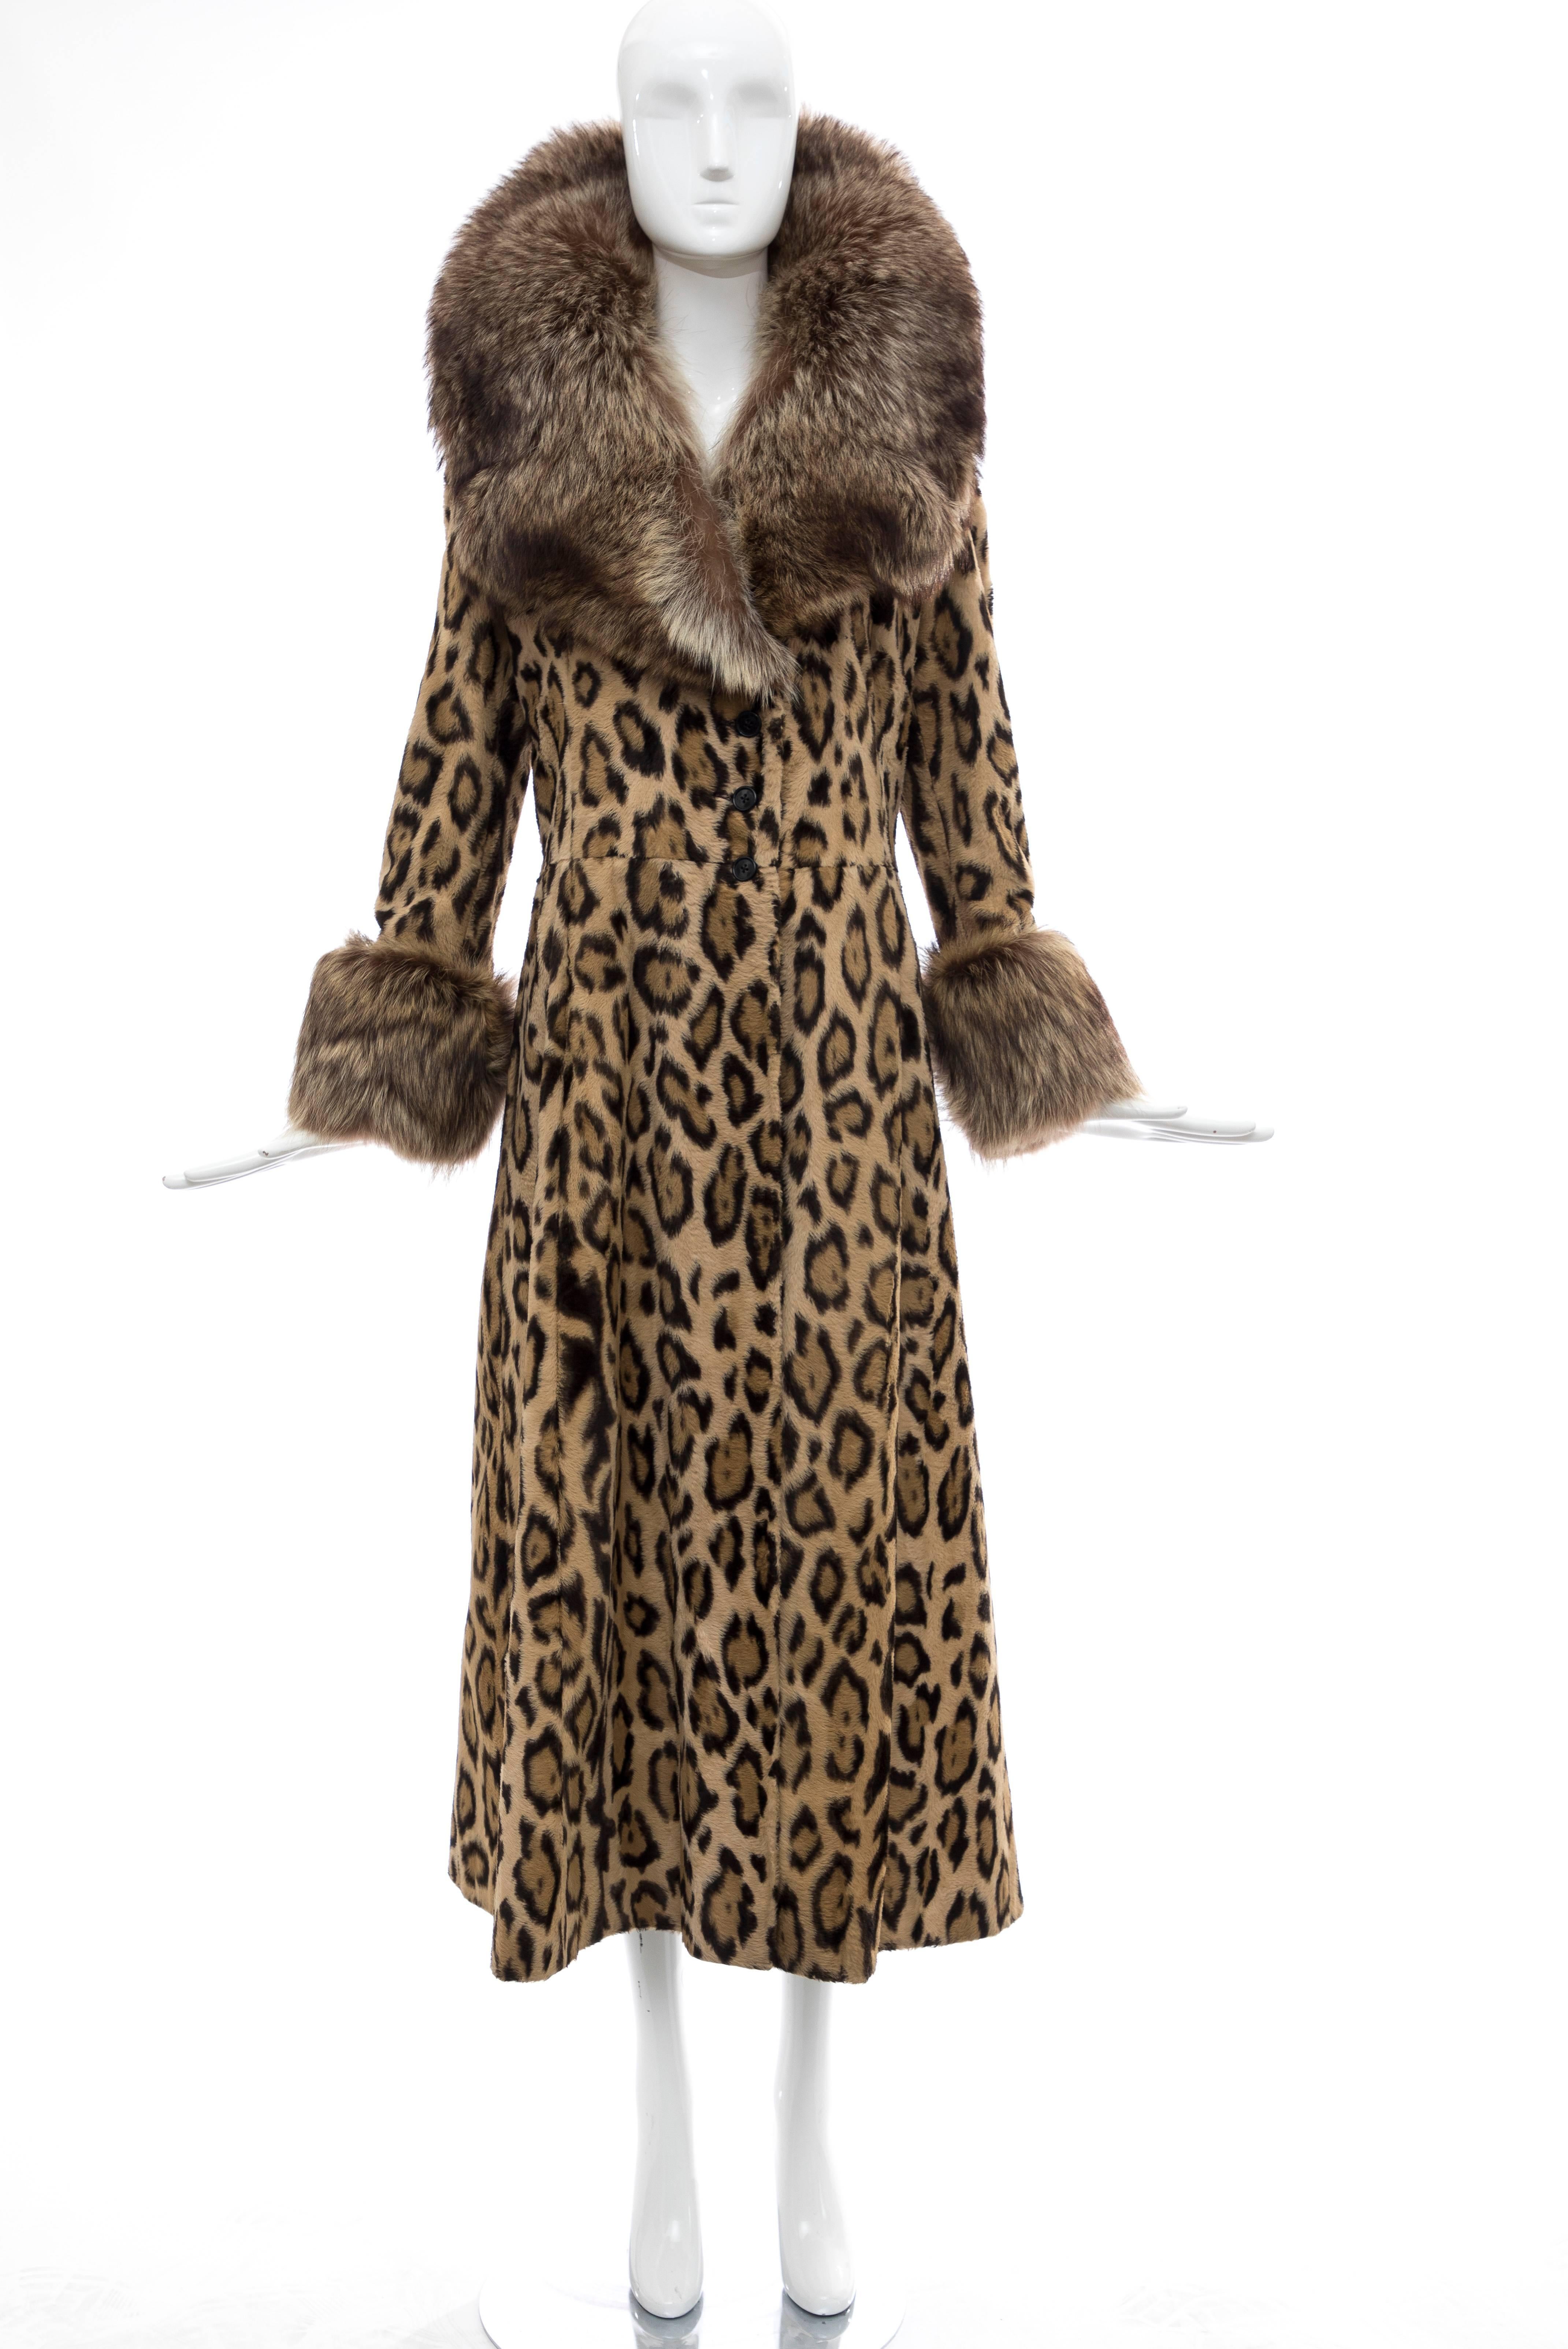 Goldring's Couture, Circa: 1970's faux leopard button front maxicoat with dramatic racoon fur collar and cuffs, two front pockets and fully lined in satin.

No Size Label

Bust: 37, Waist: 34, Hips: 50, Sleeve: 24, Shoulder: 16, Length: 50.5